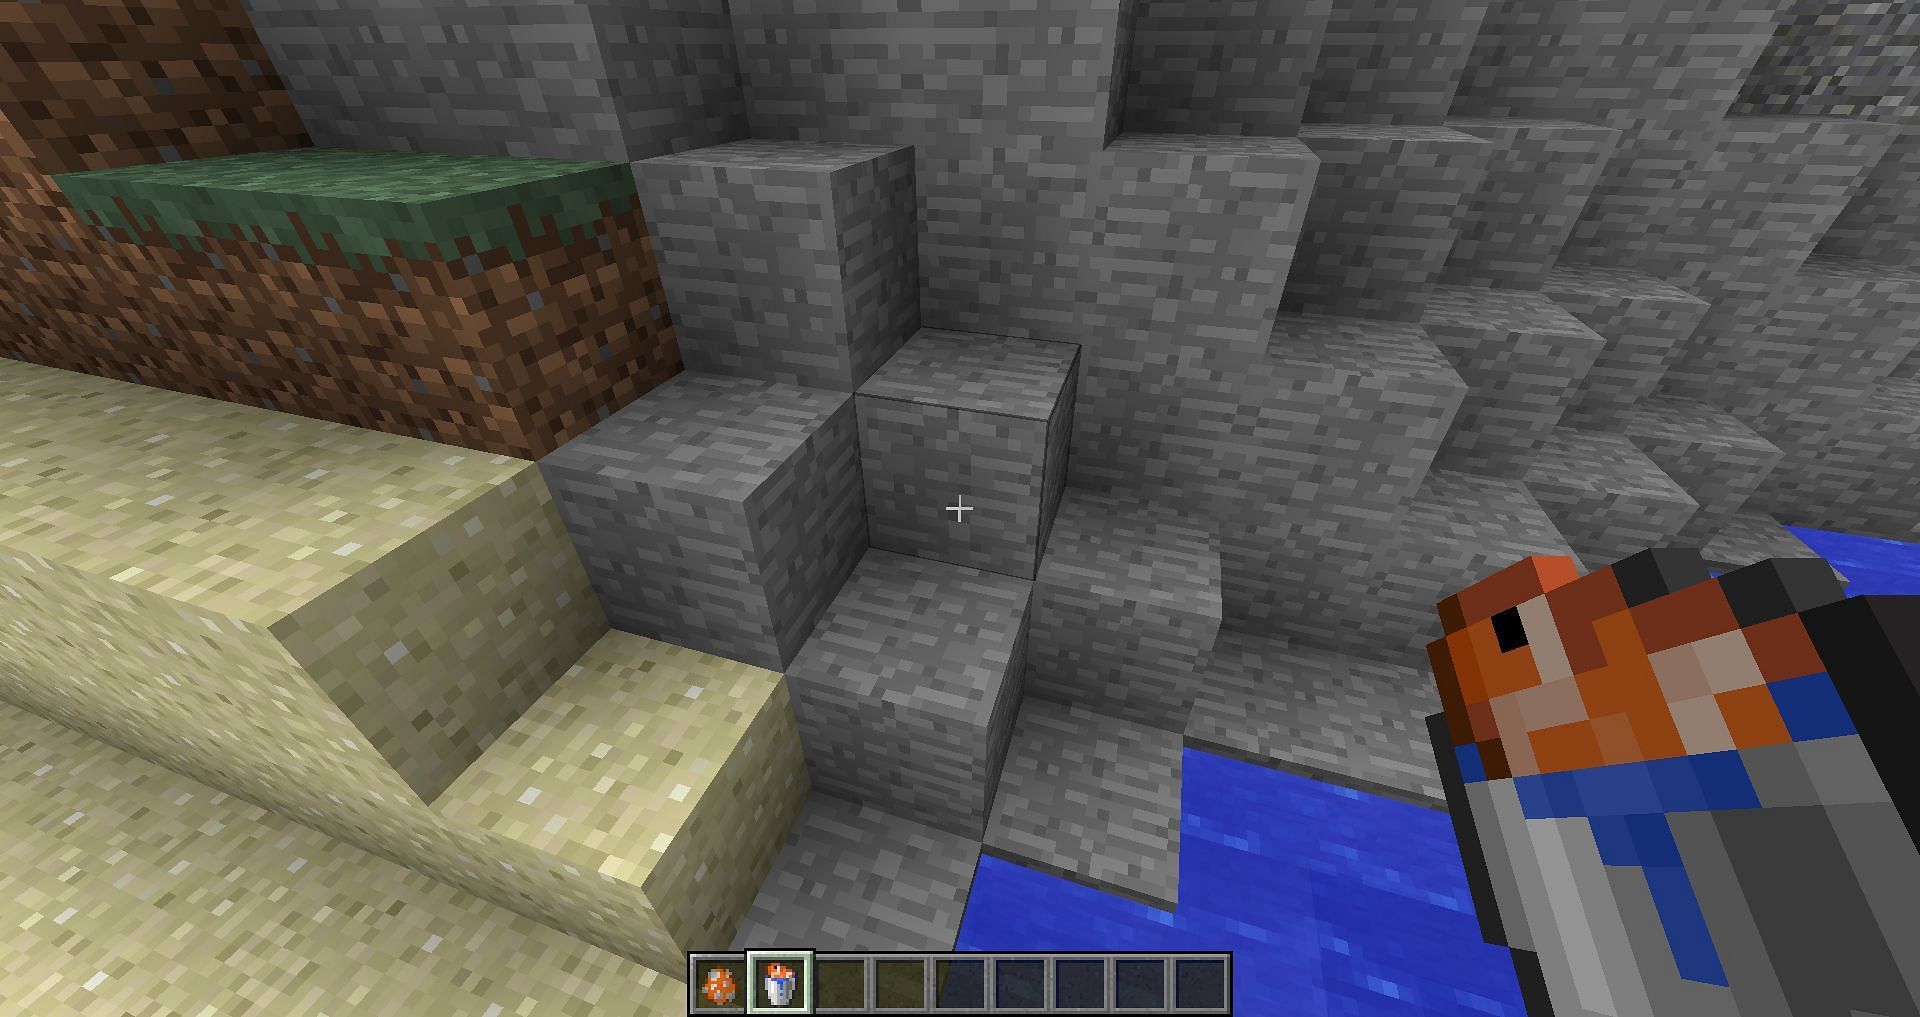 Fish can be collected in buckets. Image via Minecraft